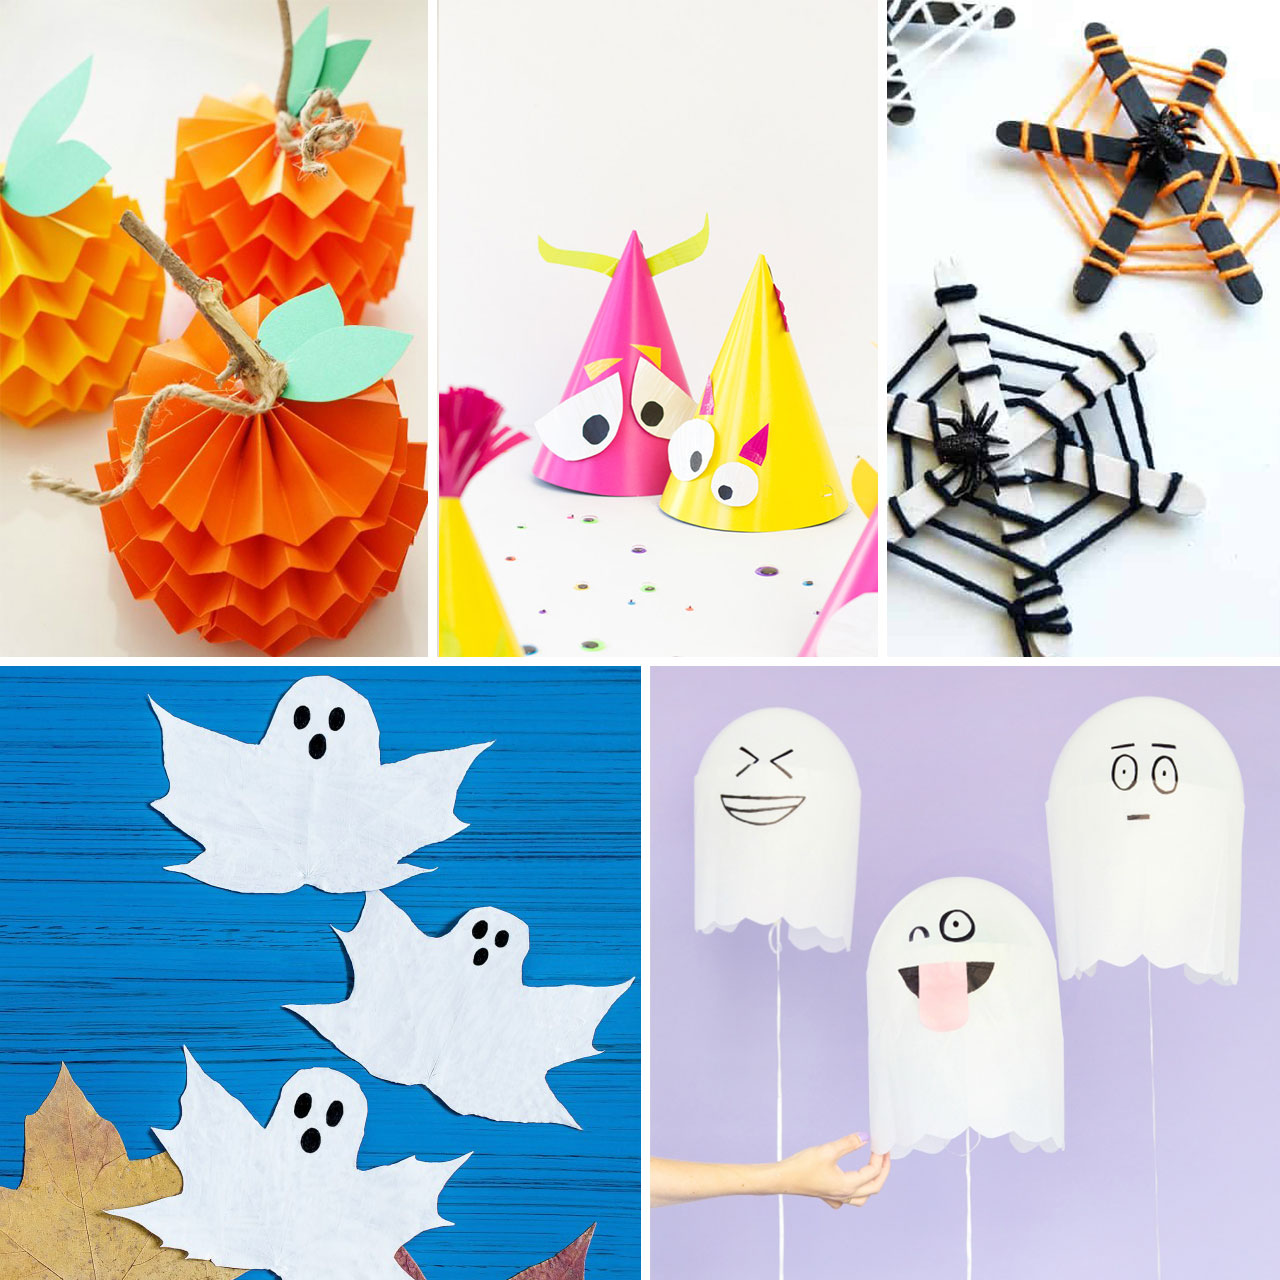 Easy Halloween crafts ideas for kids to engage with. Fun loving spooky crafts for kids to make. Find 15 more Halloween party crafts ideas.